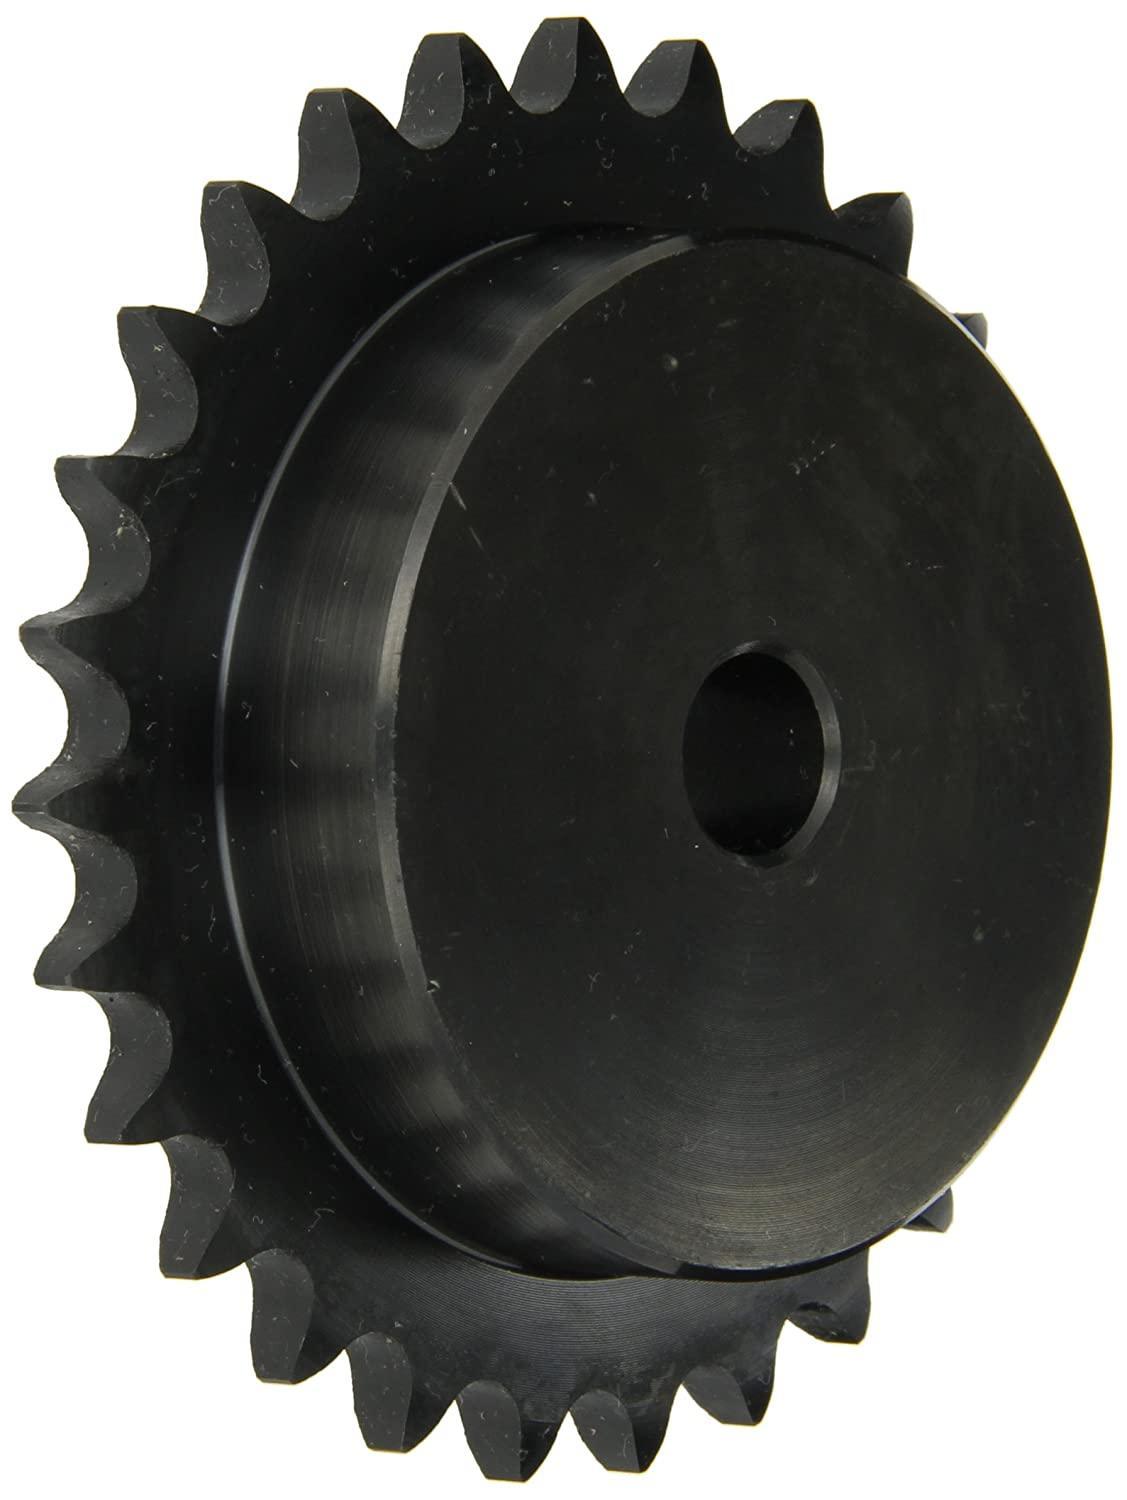 40B48 Roller Chain Sprocket With Stock Bore - Forces Inc